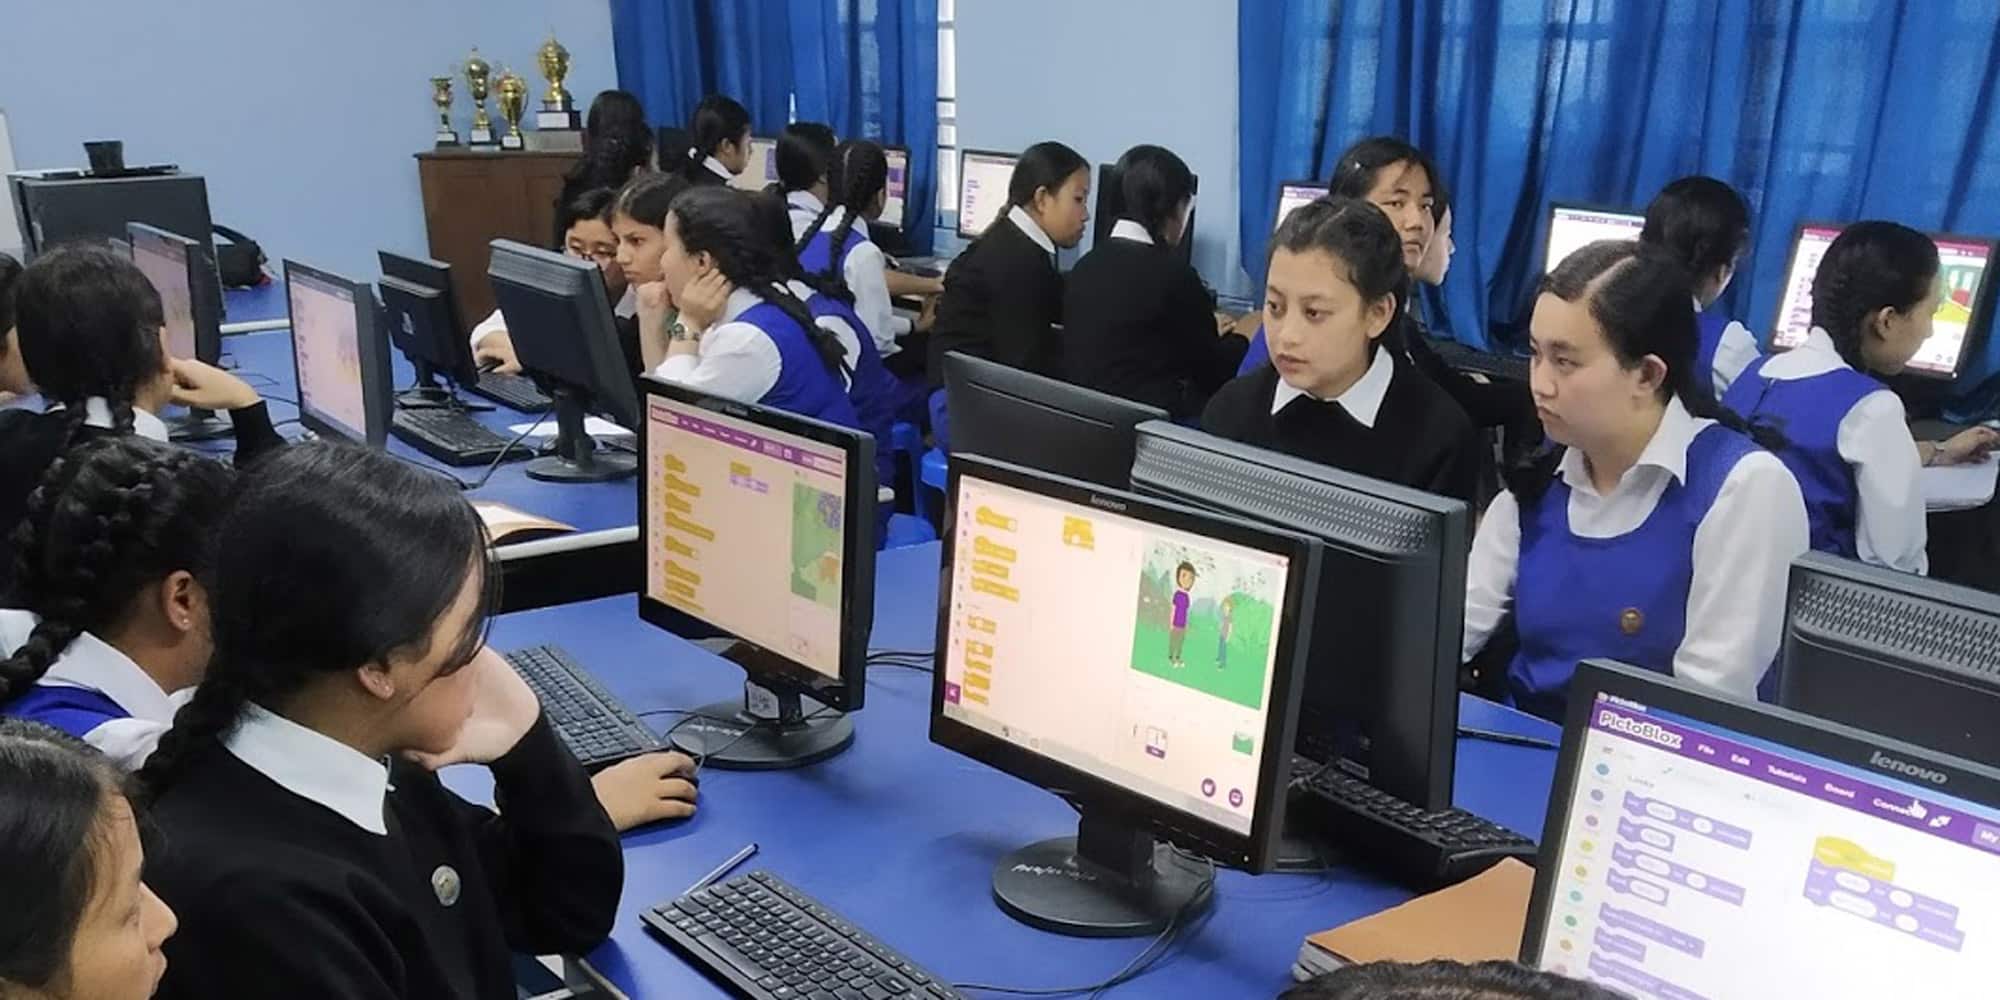 Computers with Web Access